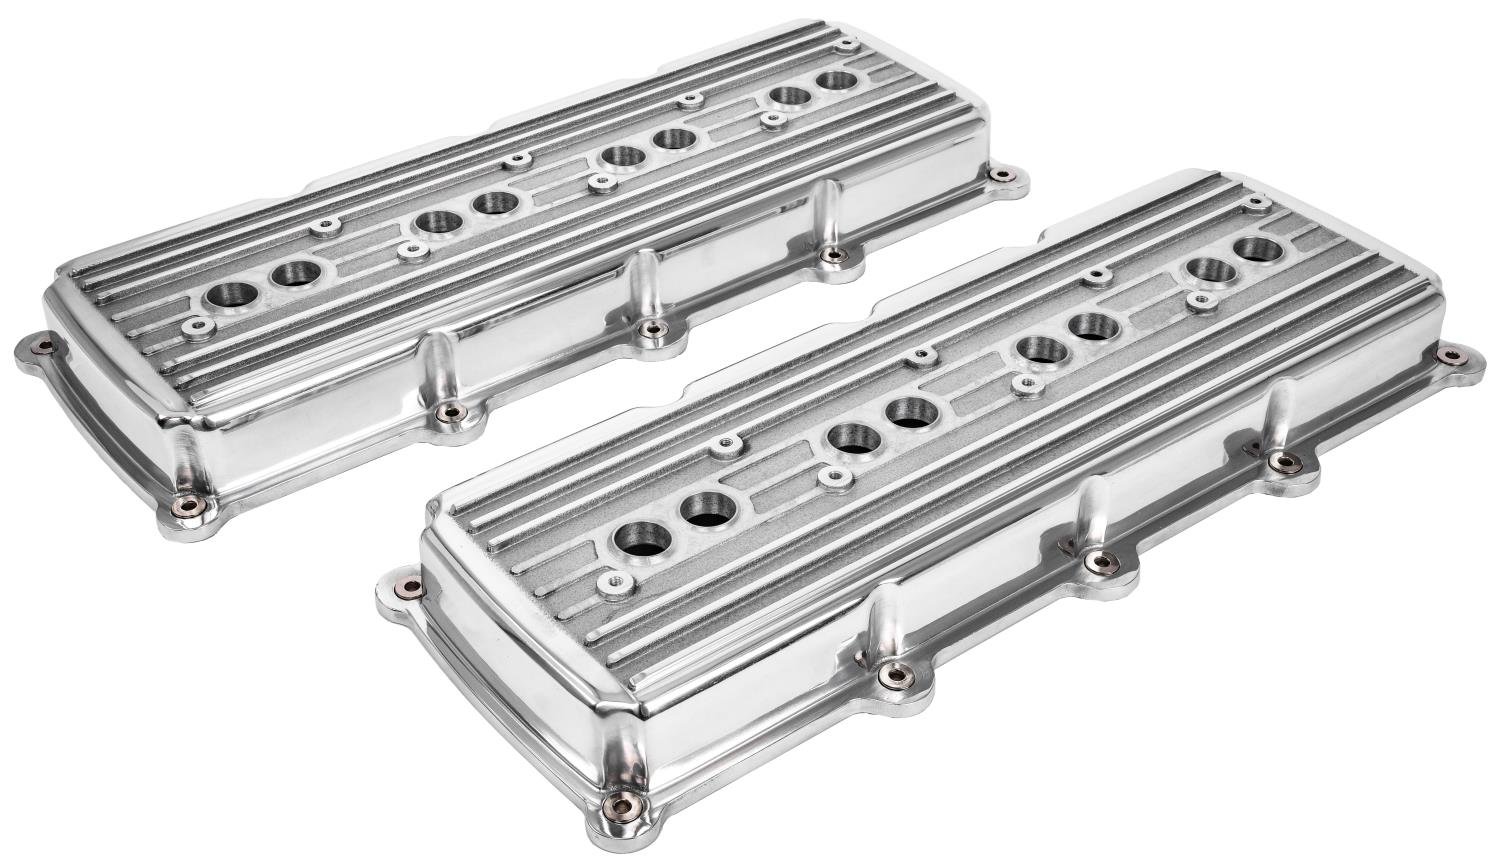 JEGS Cast Aluminum Valve Covers for 5.7L, 6.1L, 6.4L Gen III Hemi Engines  [Polished Finish, Finned]